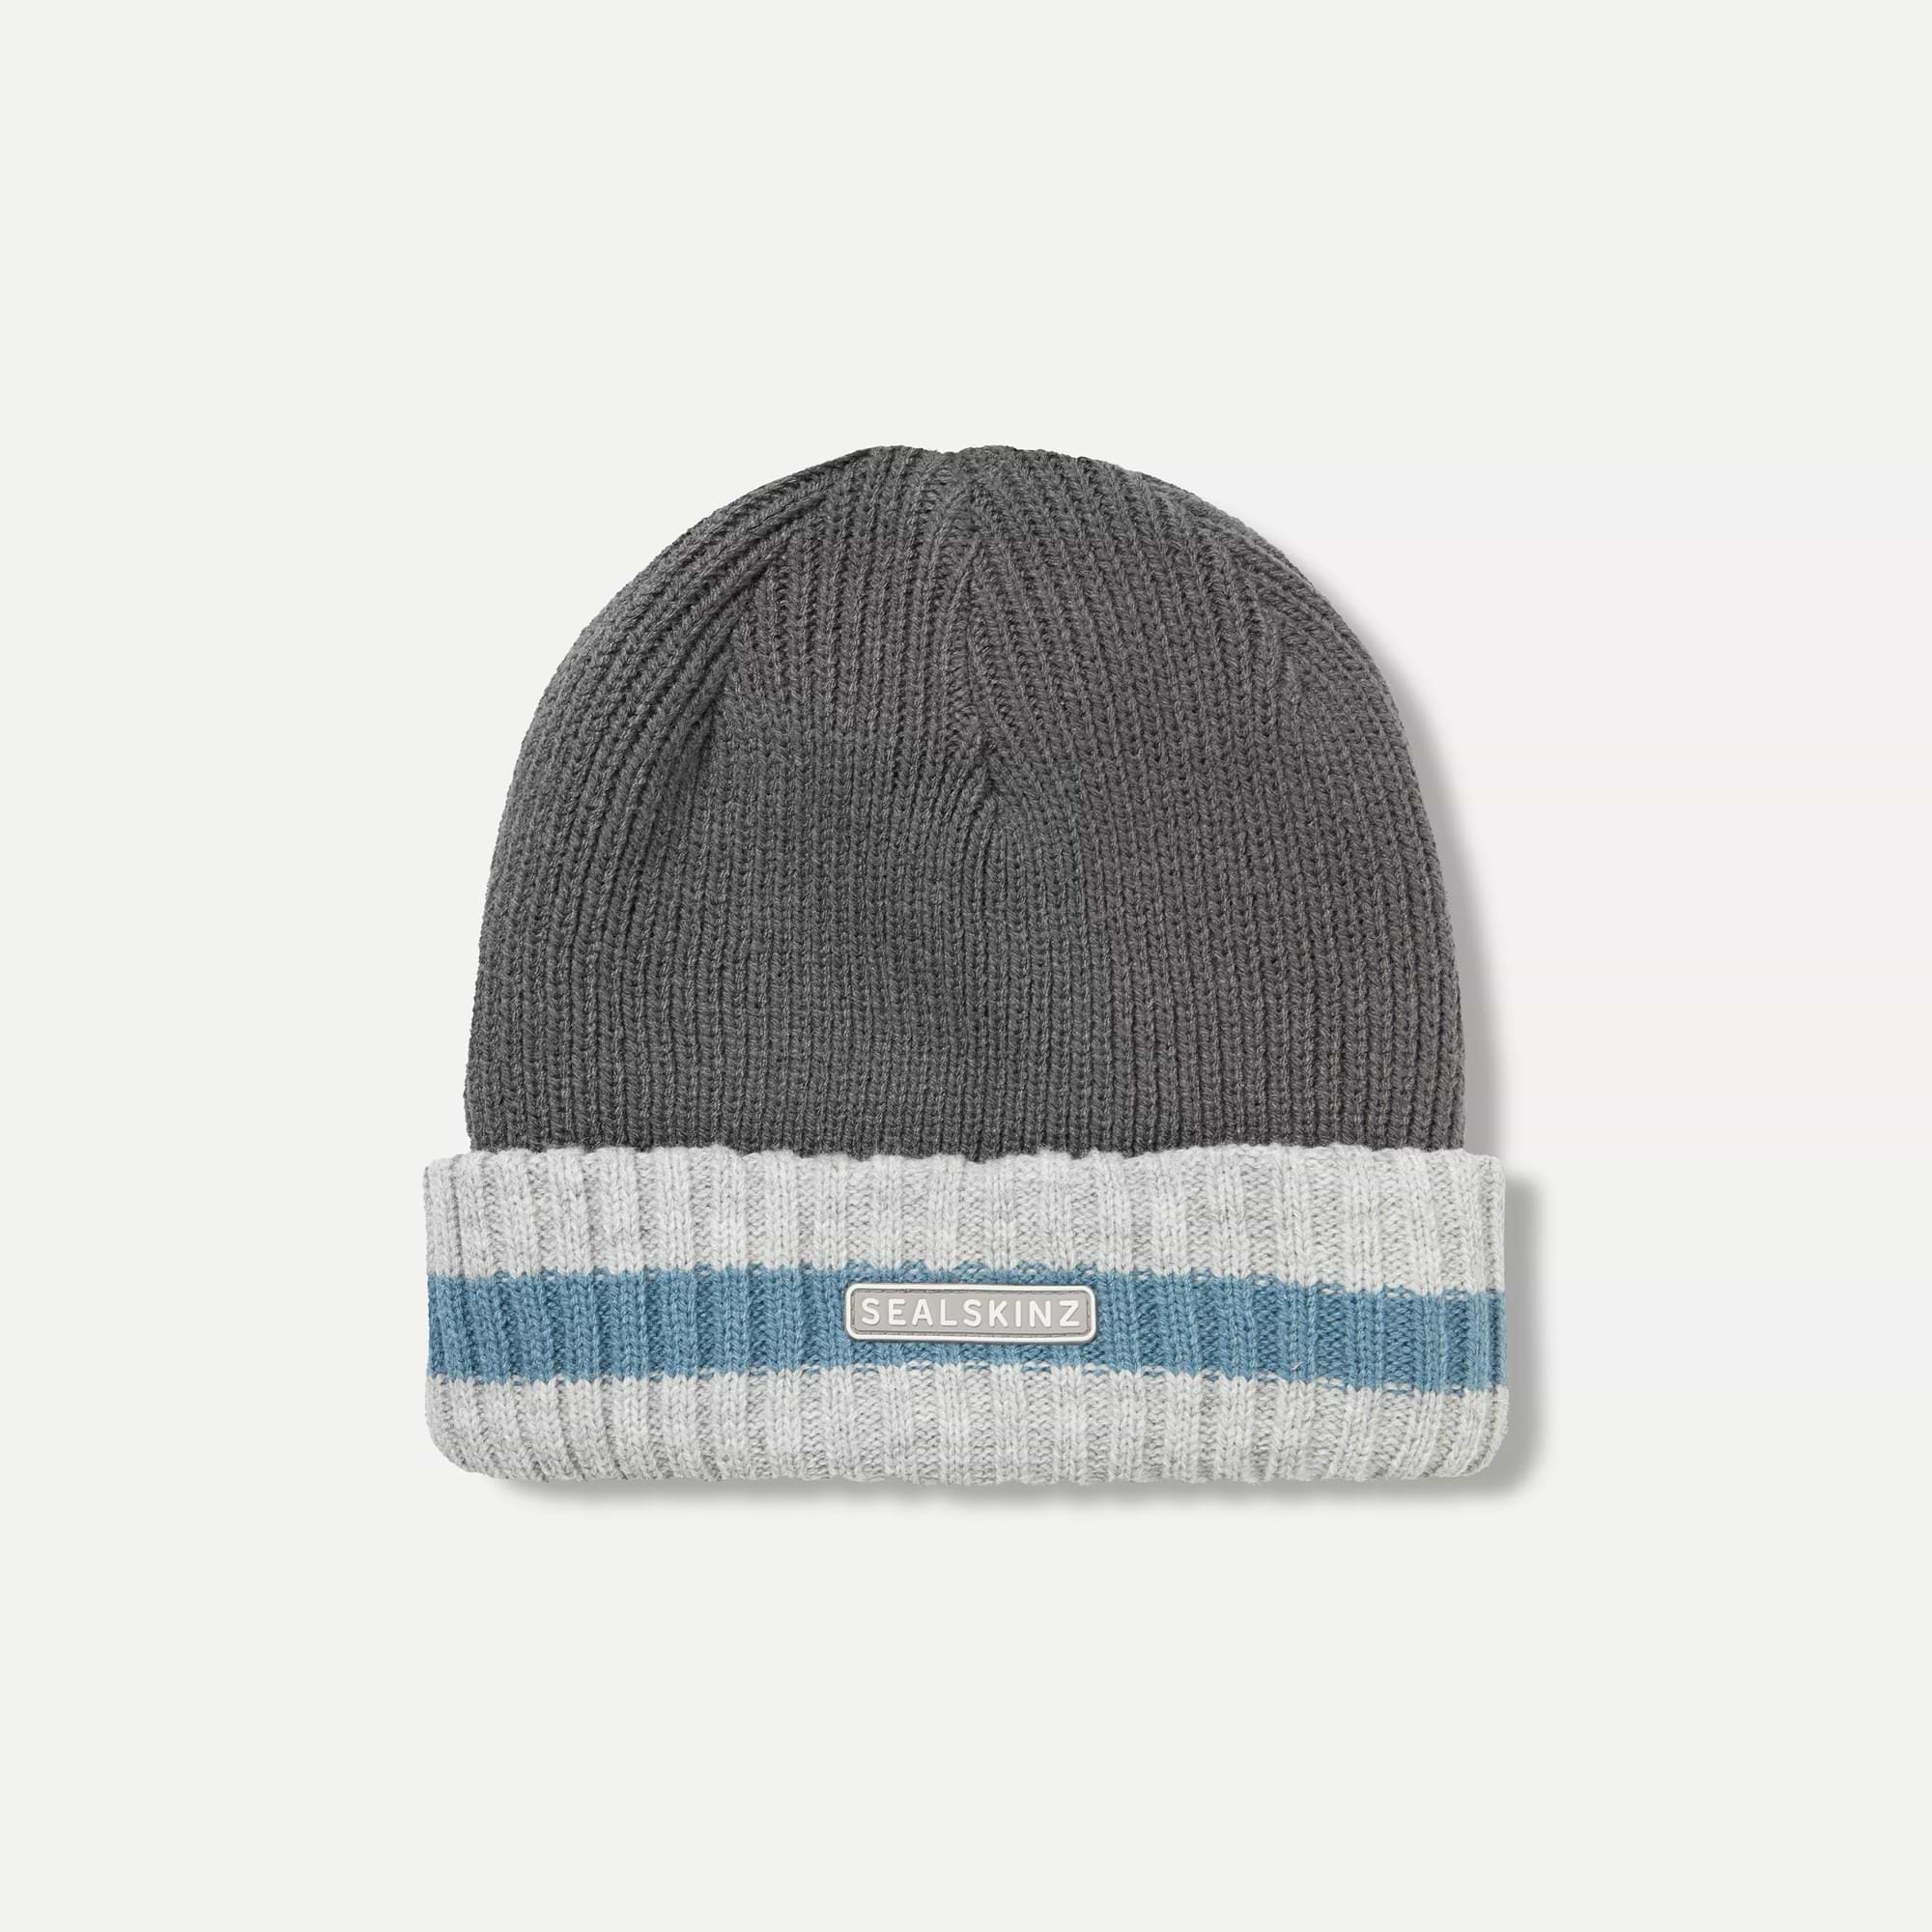 Holkham - Waterproof Cold Weather Striped Roll Cuff Beanie 